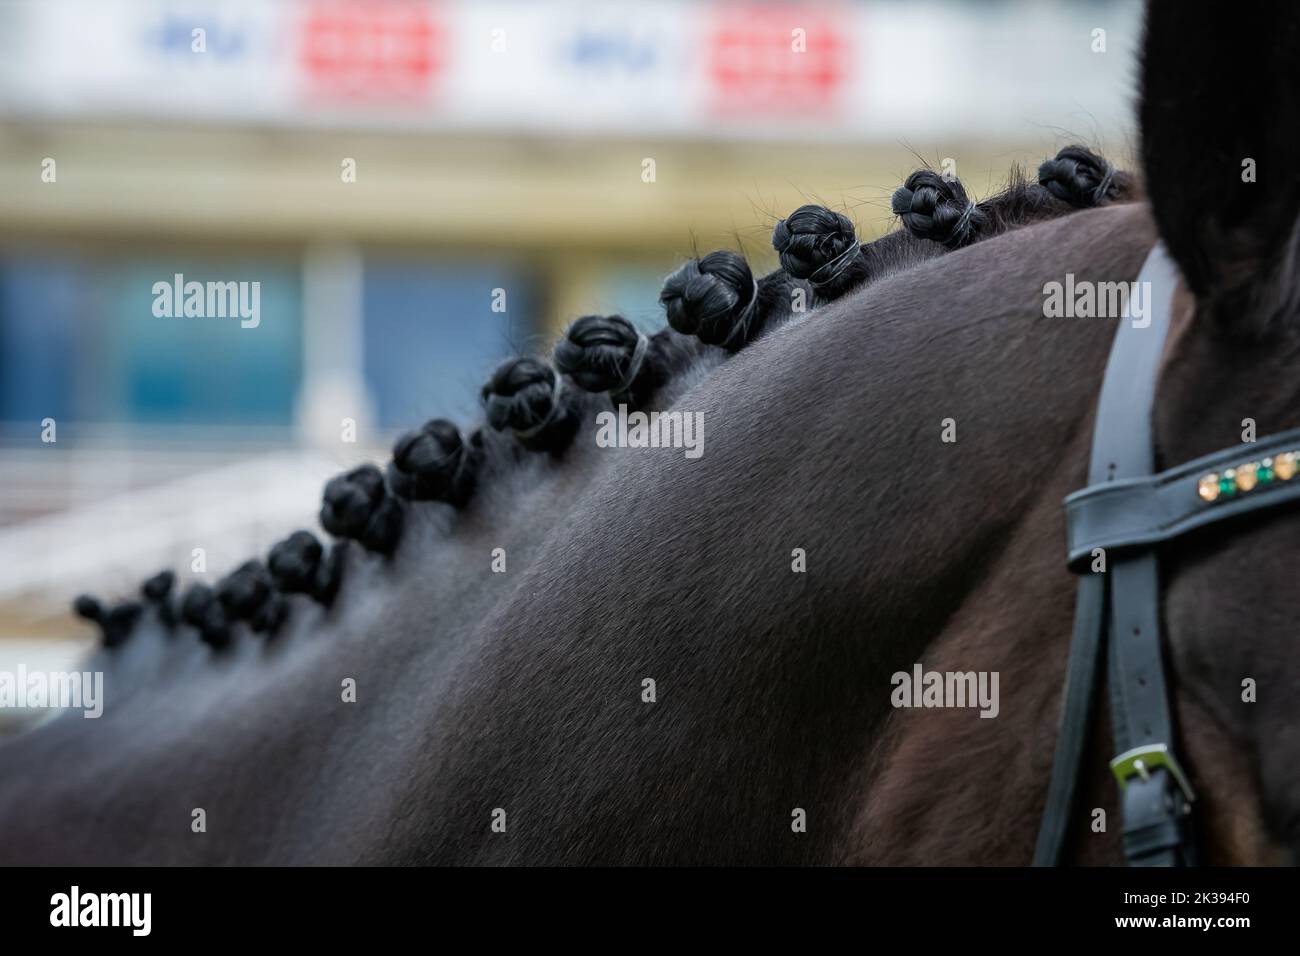 Scenes from the second day of York Racecourse's Tribute Weekend, Sunday 22nd May 2022, featuring the Sky Bet Sunday Series Stock Photo